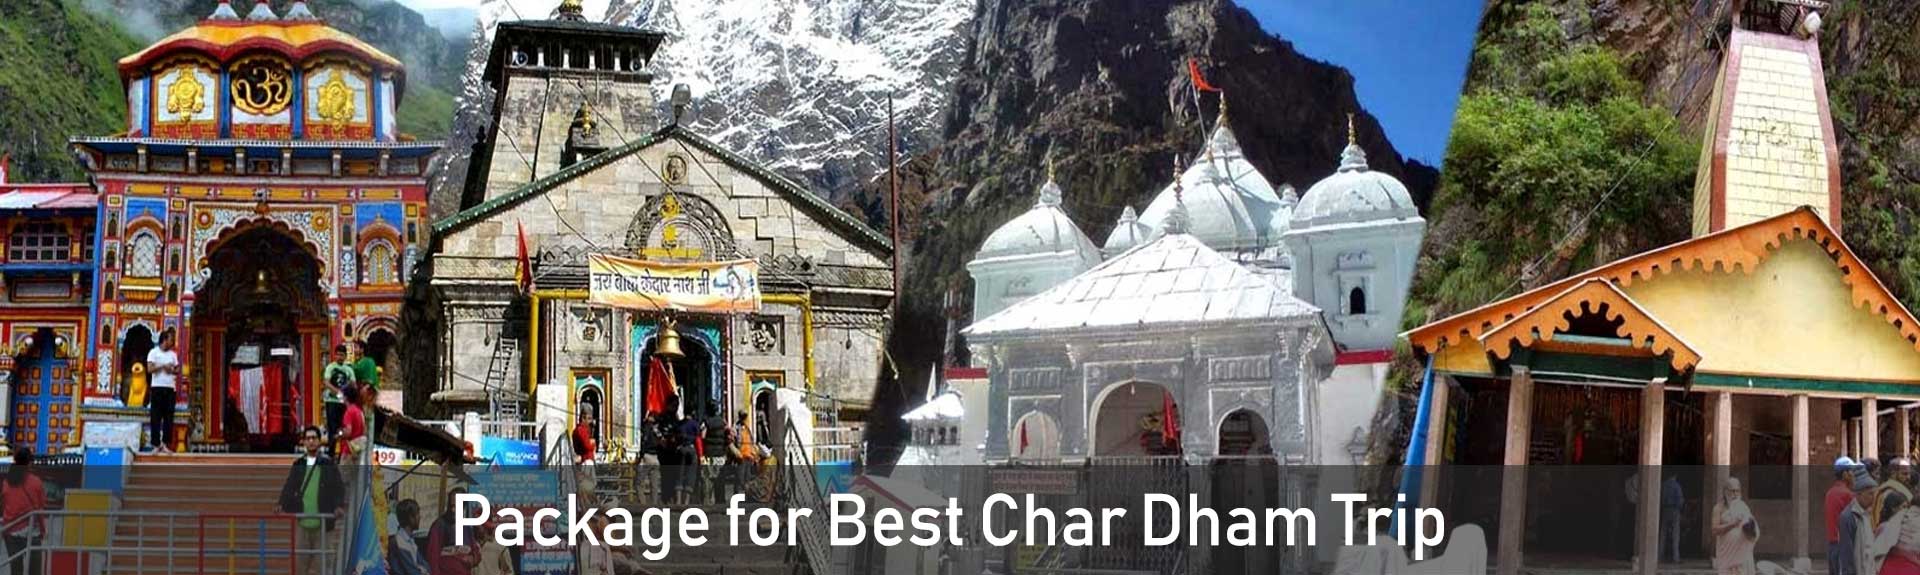 Package for Best Char Dham Trip